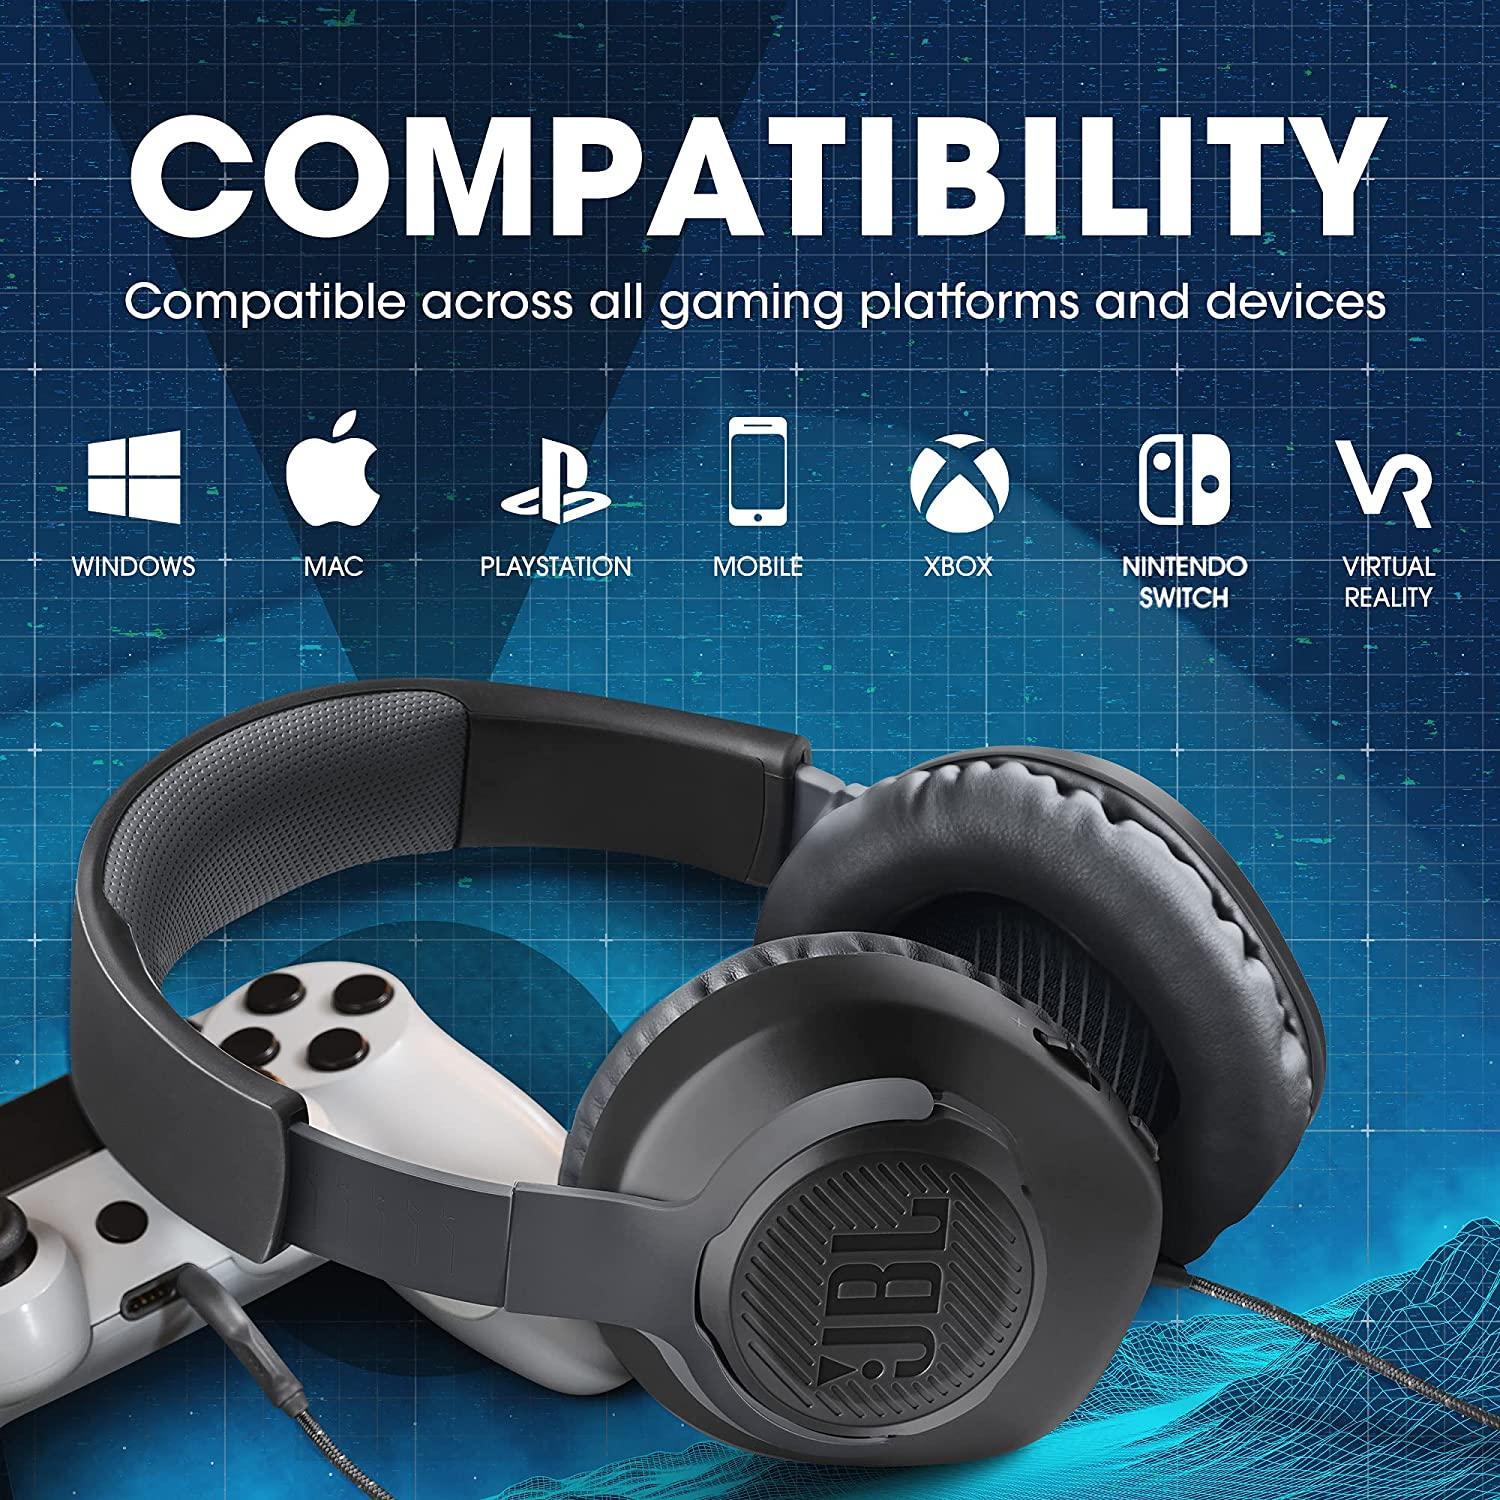 JBL Quantum 100P Console  Wired over-ear gaming headset with a detachable  mic